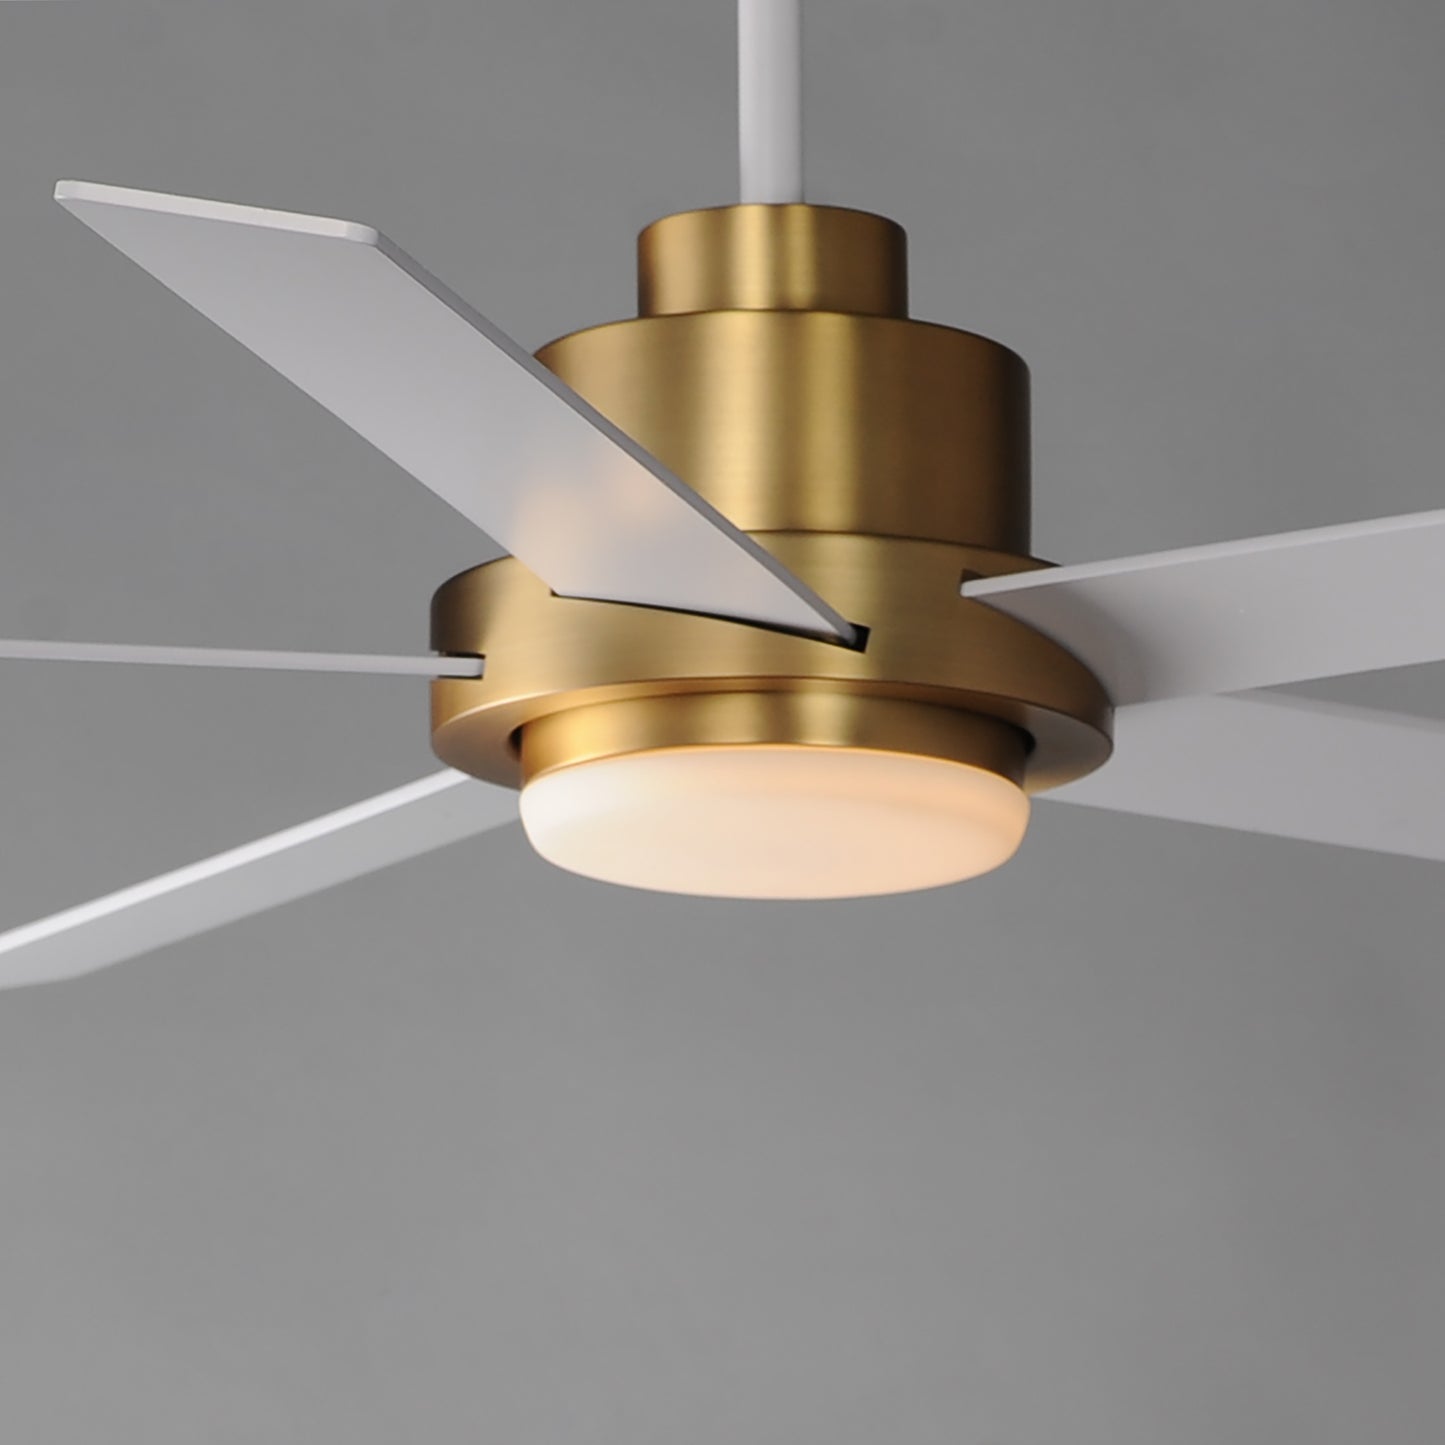 88826WTNAB - Daisy 60" Ceiling Fan - Natural Aged Brass